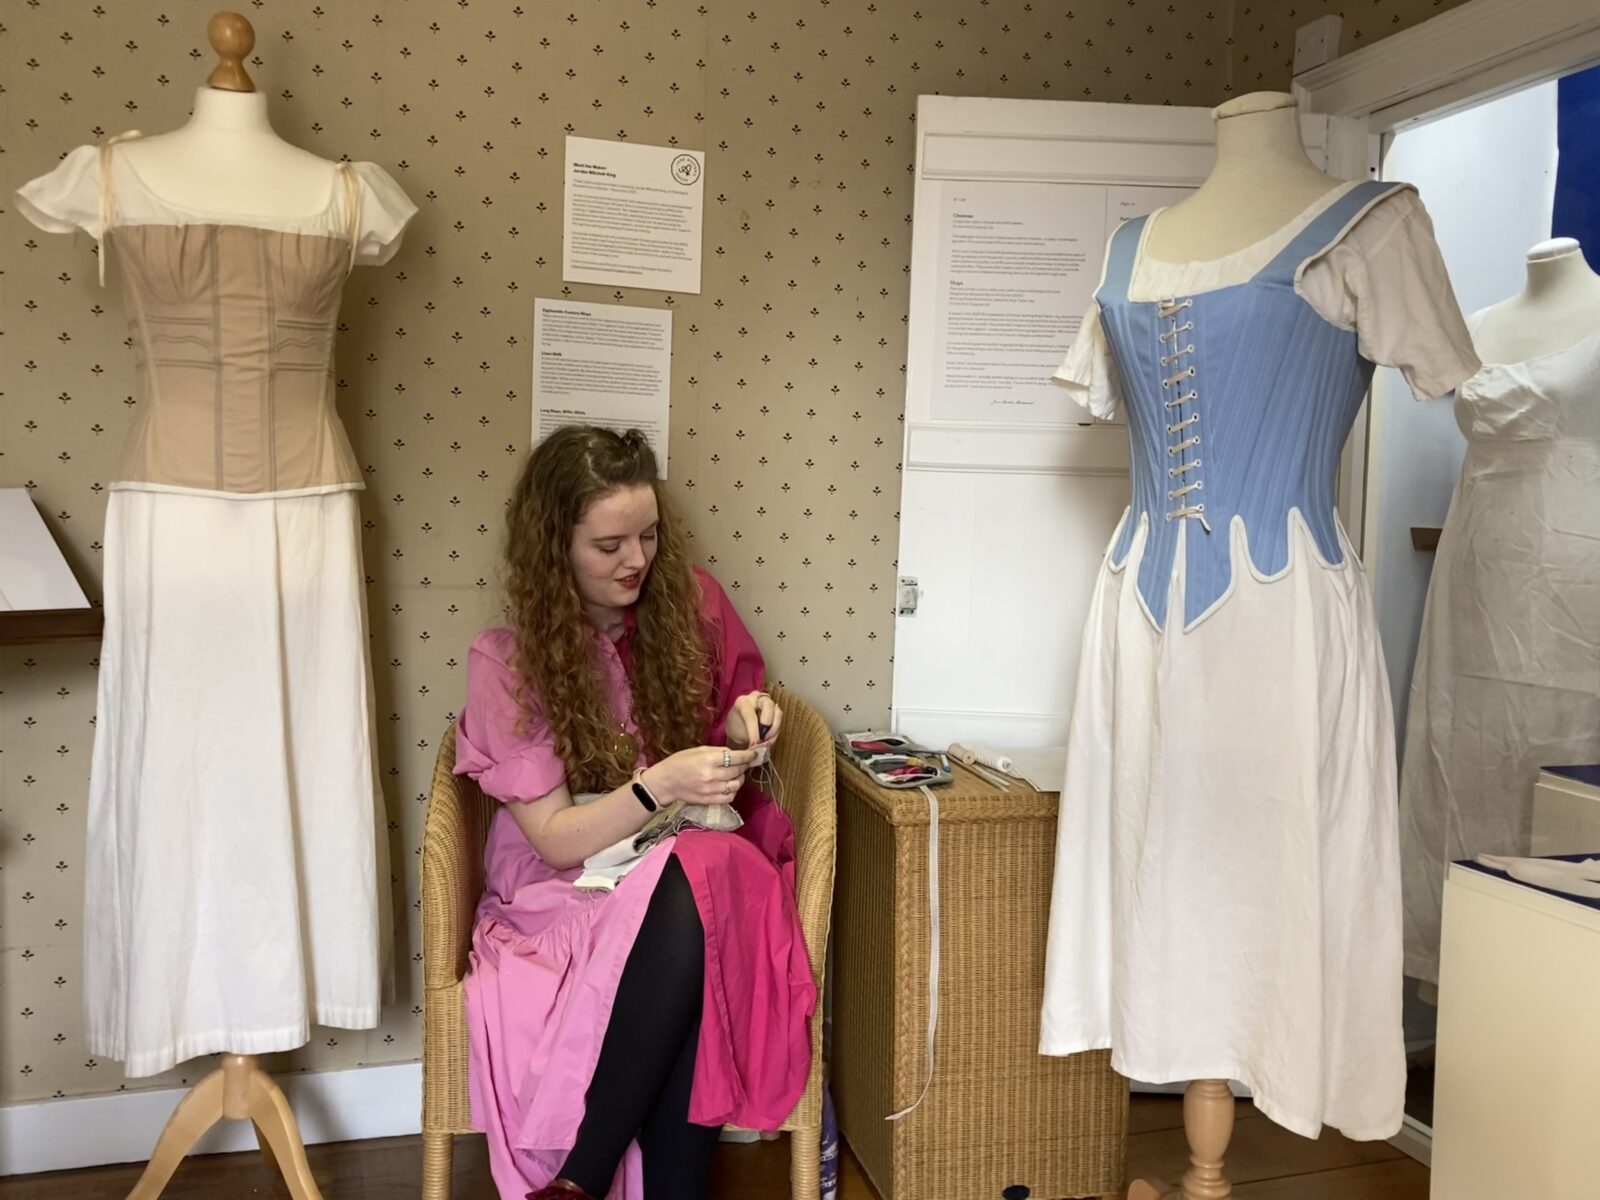 Jordan Mitchell King sews her reproduction stays at the House